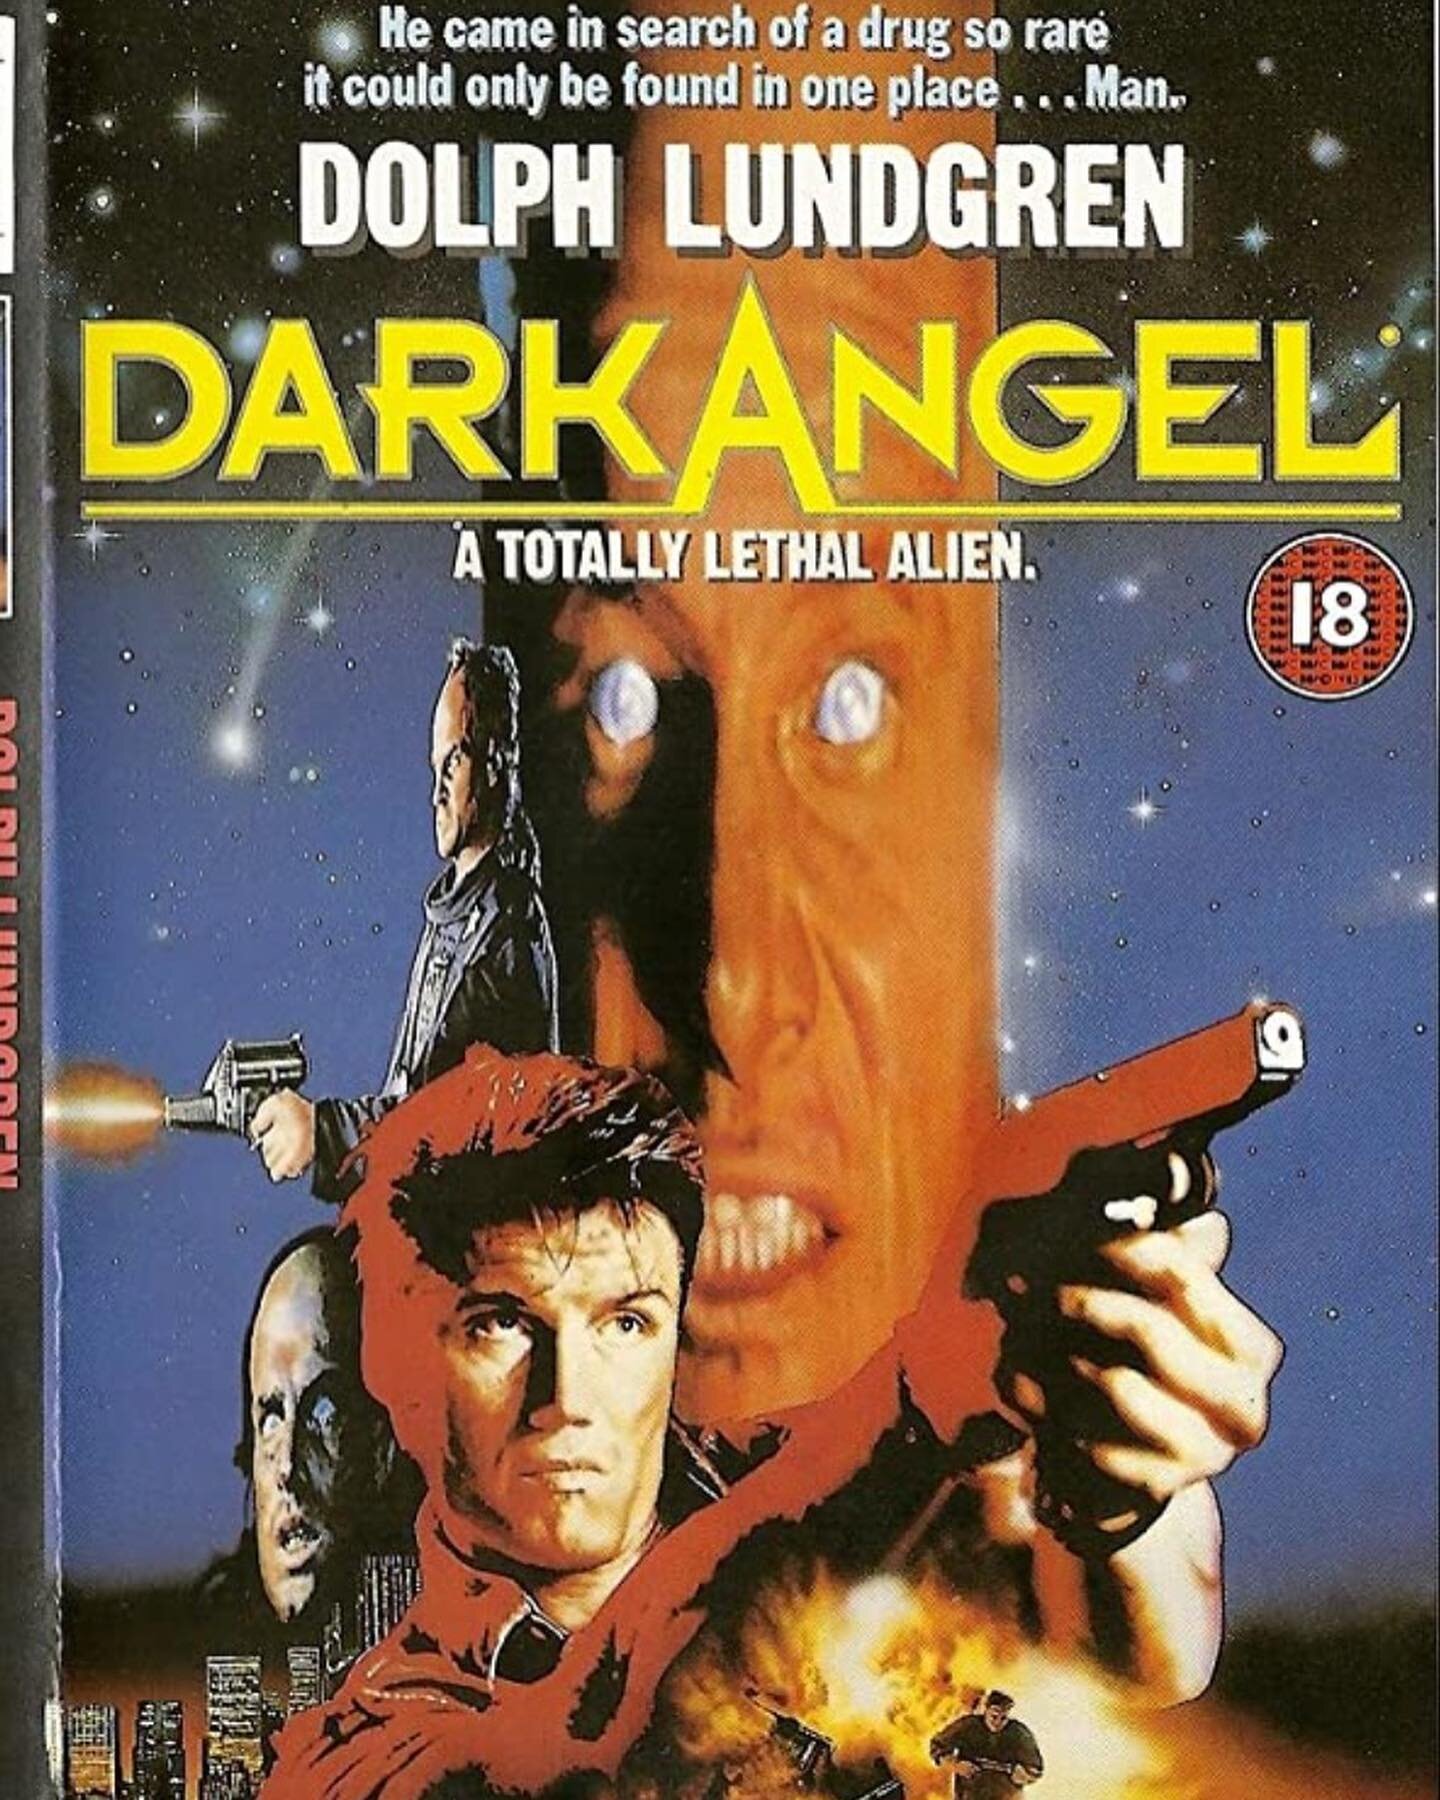 On our 44th episode of They Came From Outer Space we take alien drug dealers to task and bask in the glory of Dolph Lundgren's roundhouse kicks. That's right, we're talking about the cult classic sci-fi action flick &quot;Dark Angel&quot; released in